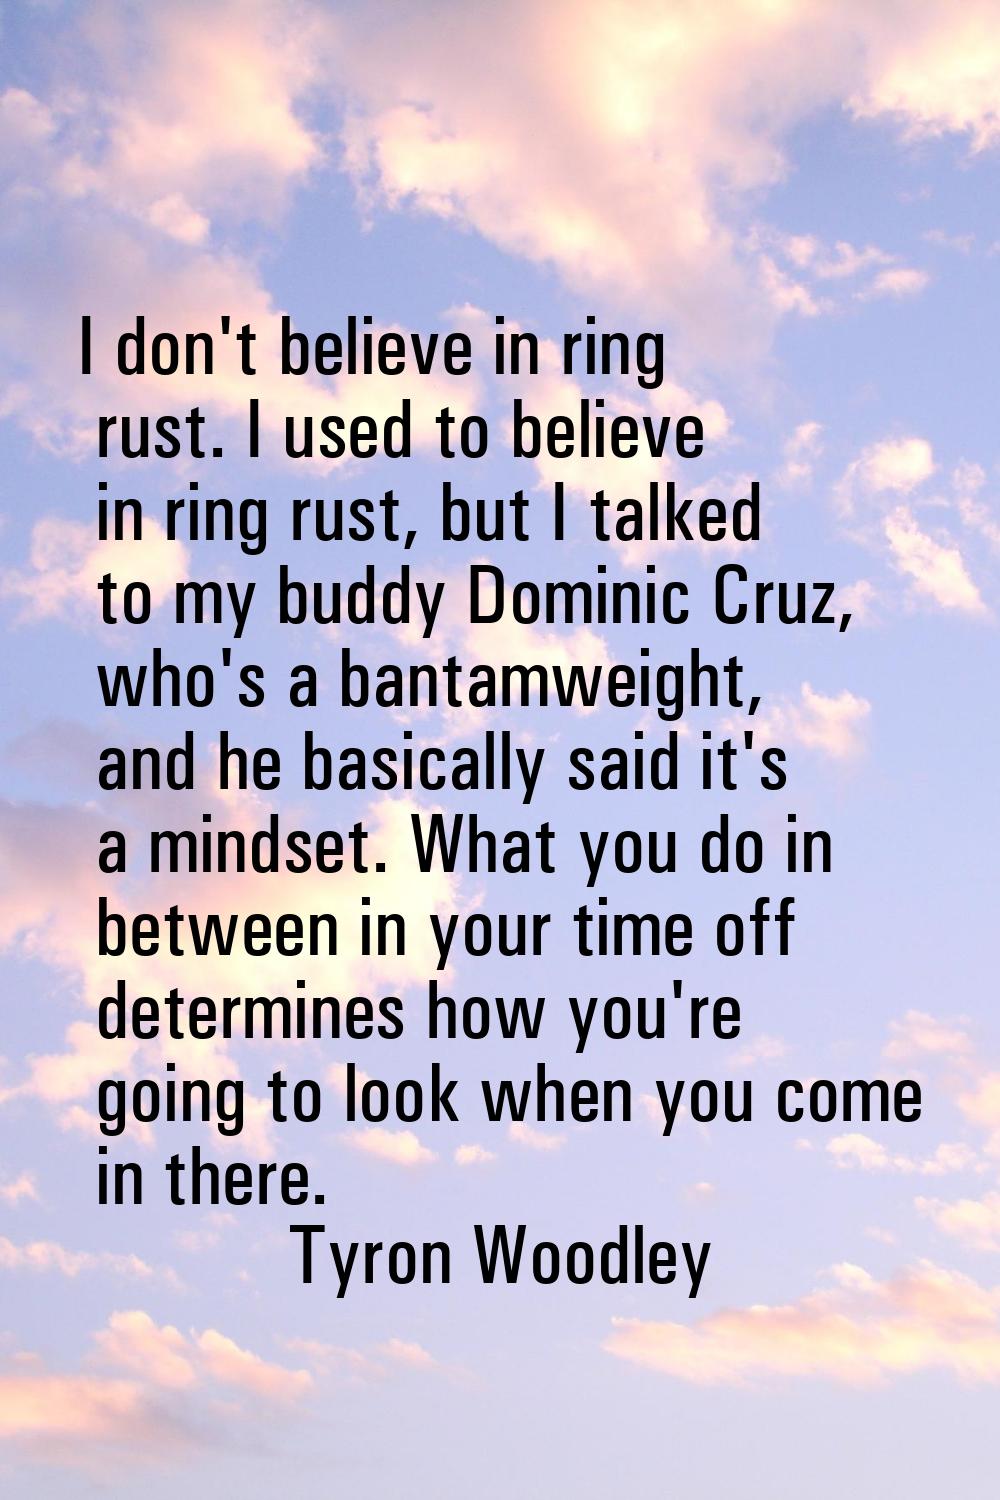 I don't believe in ring rust. I used to believe in ring rust, but I talked to my buddy Dominic Cruz